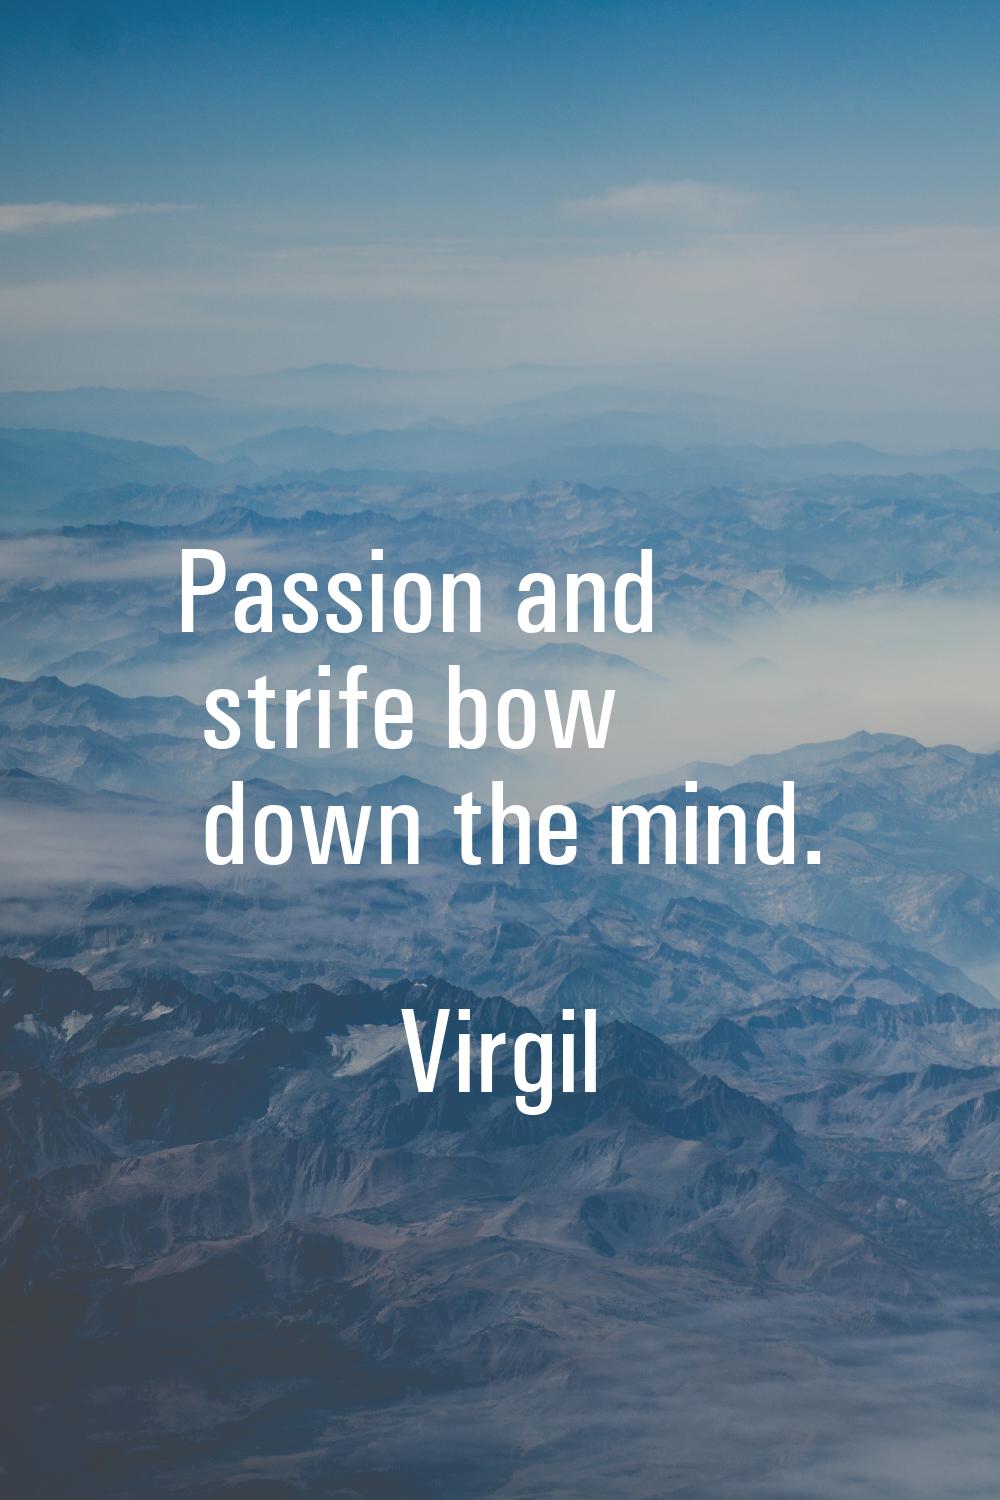 Passion and strife bow down the mind.